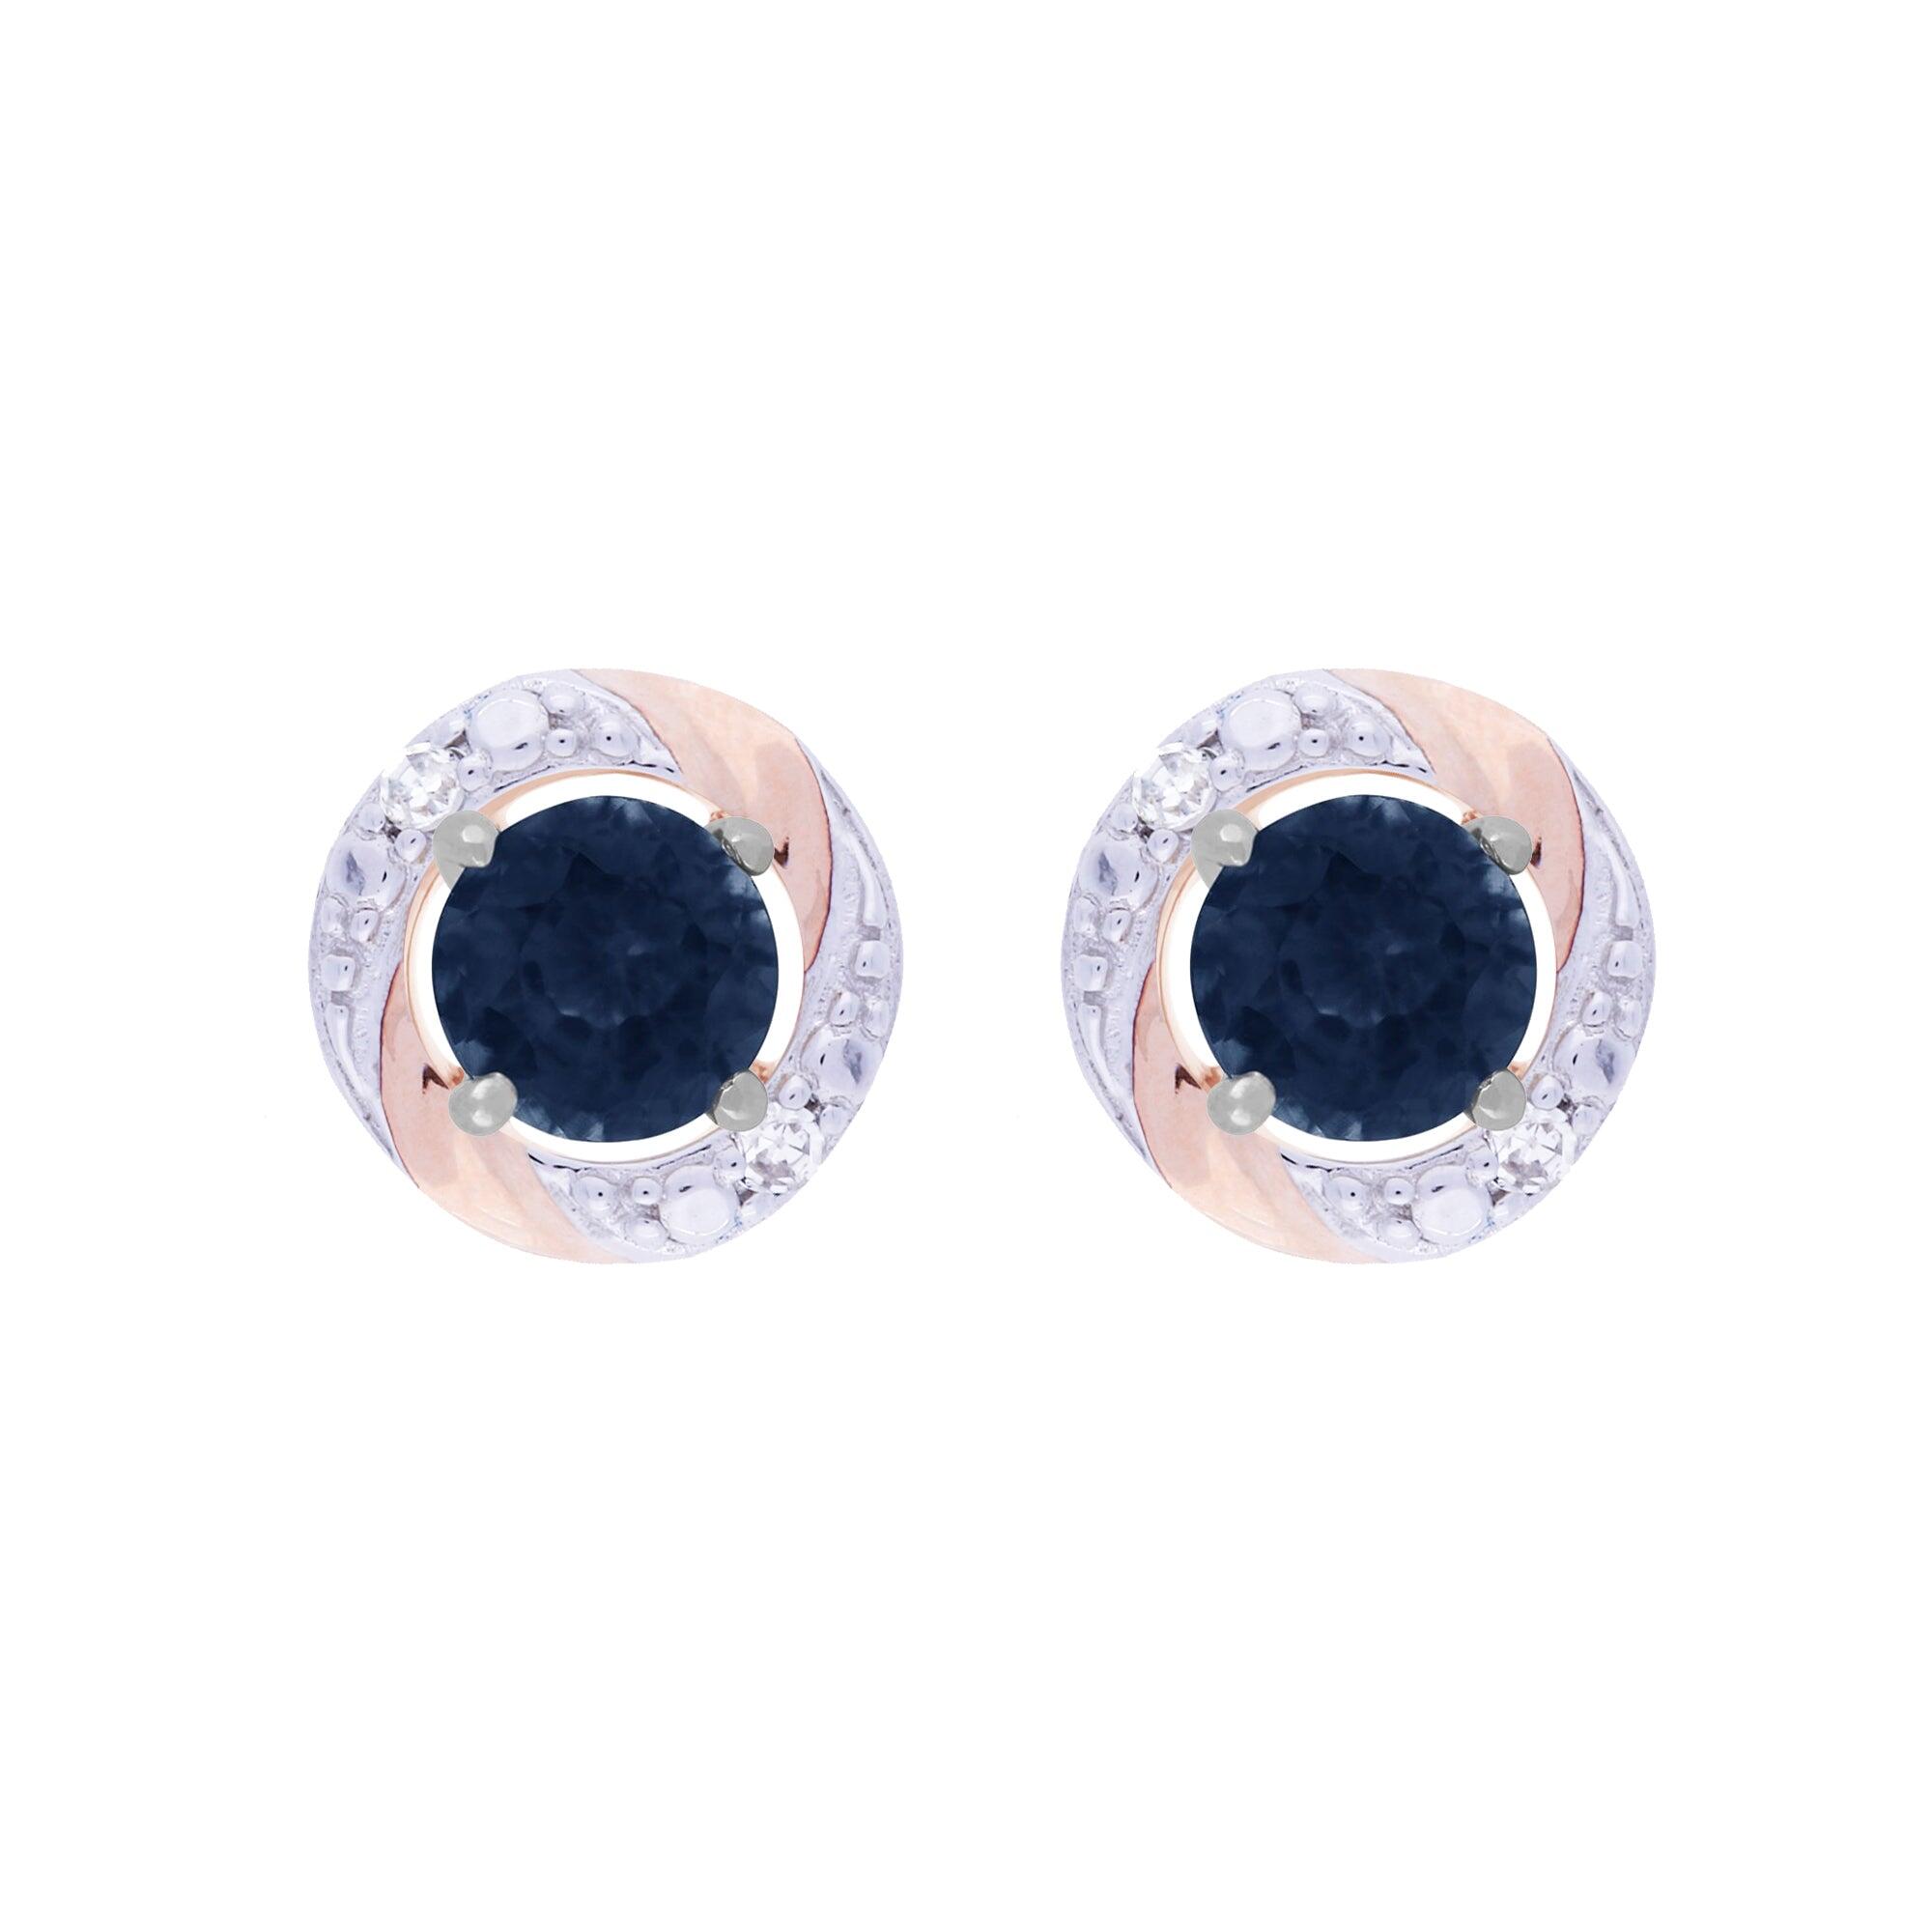 Classic Round Sapphire Stud Earrings with Detachable Diamond Round Earrings Jacket Set in 9ct White Gold